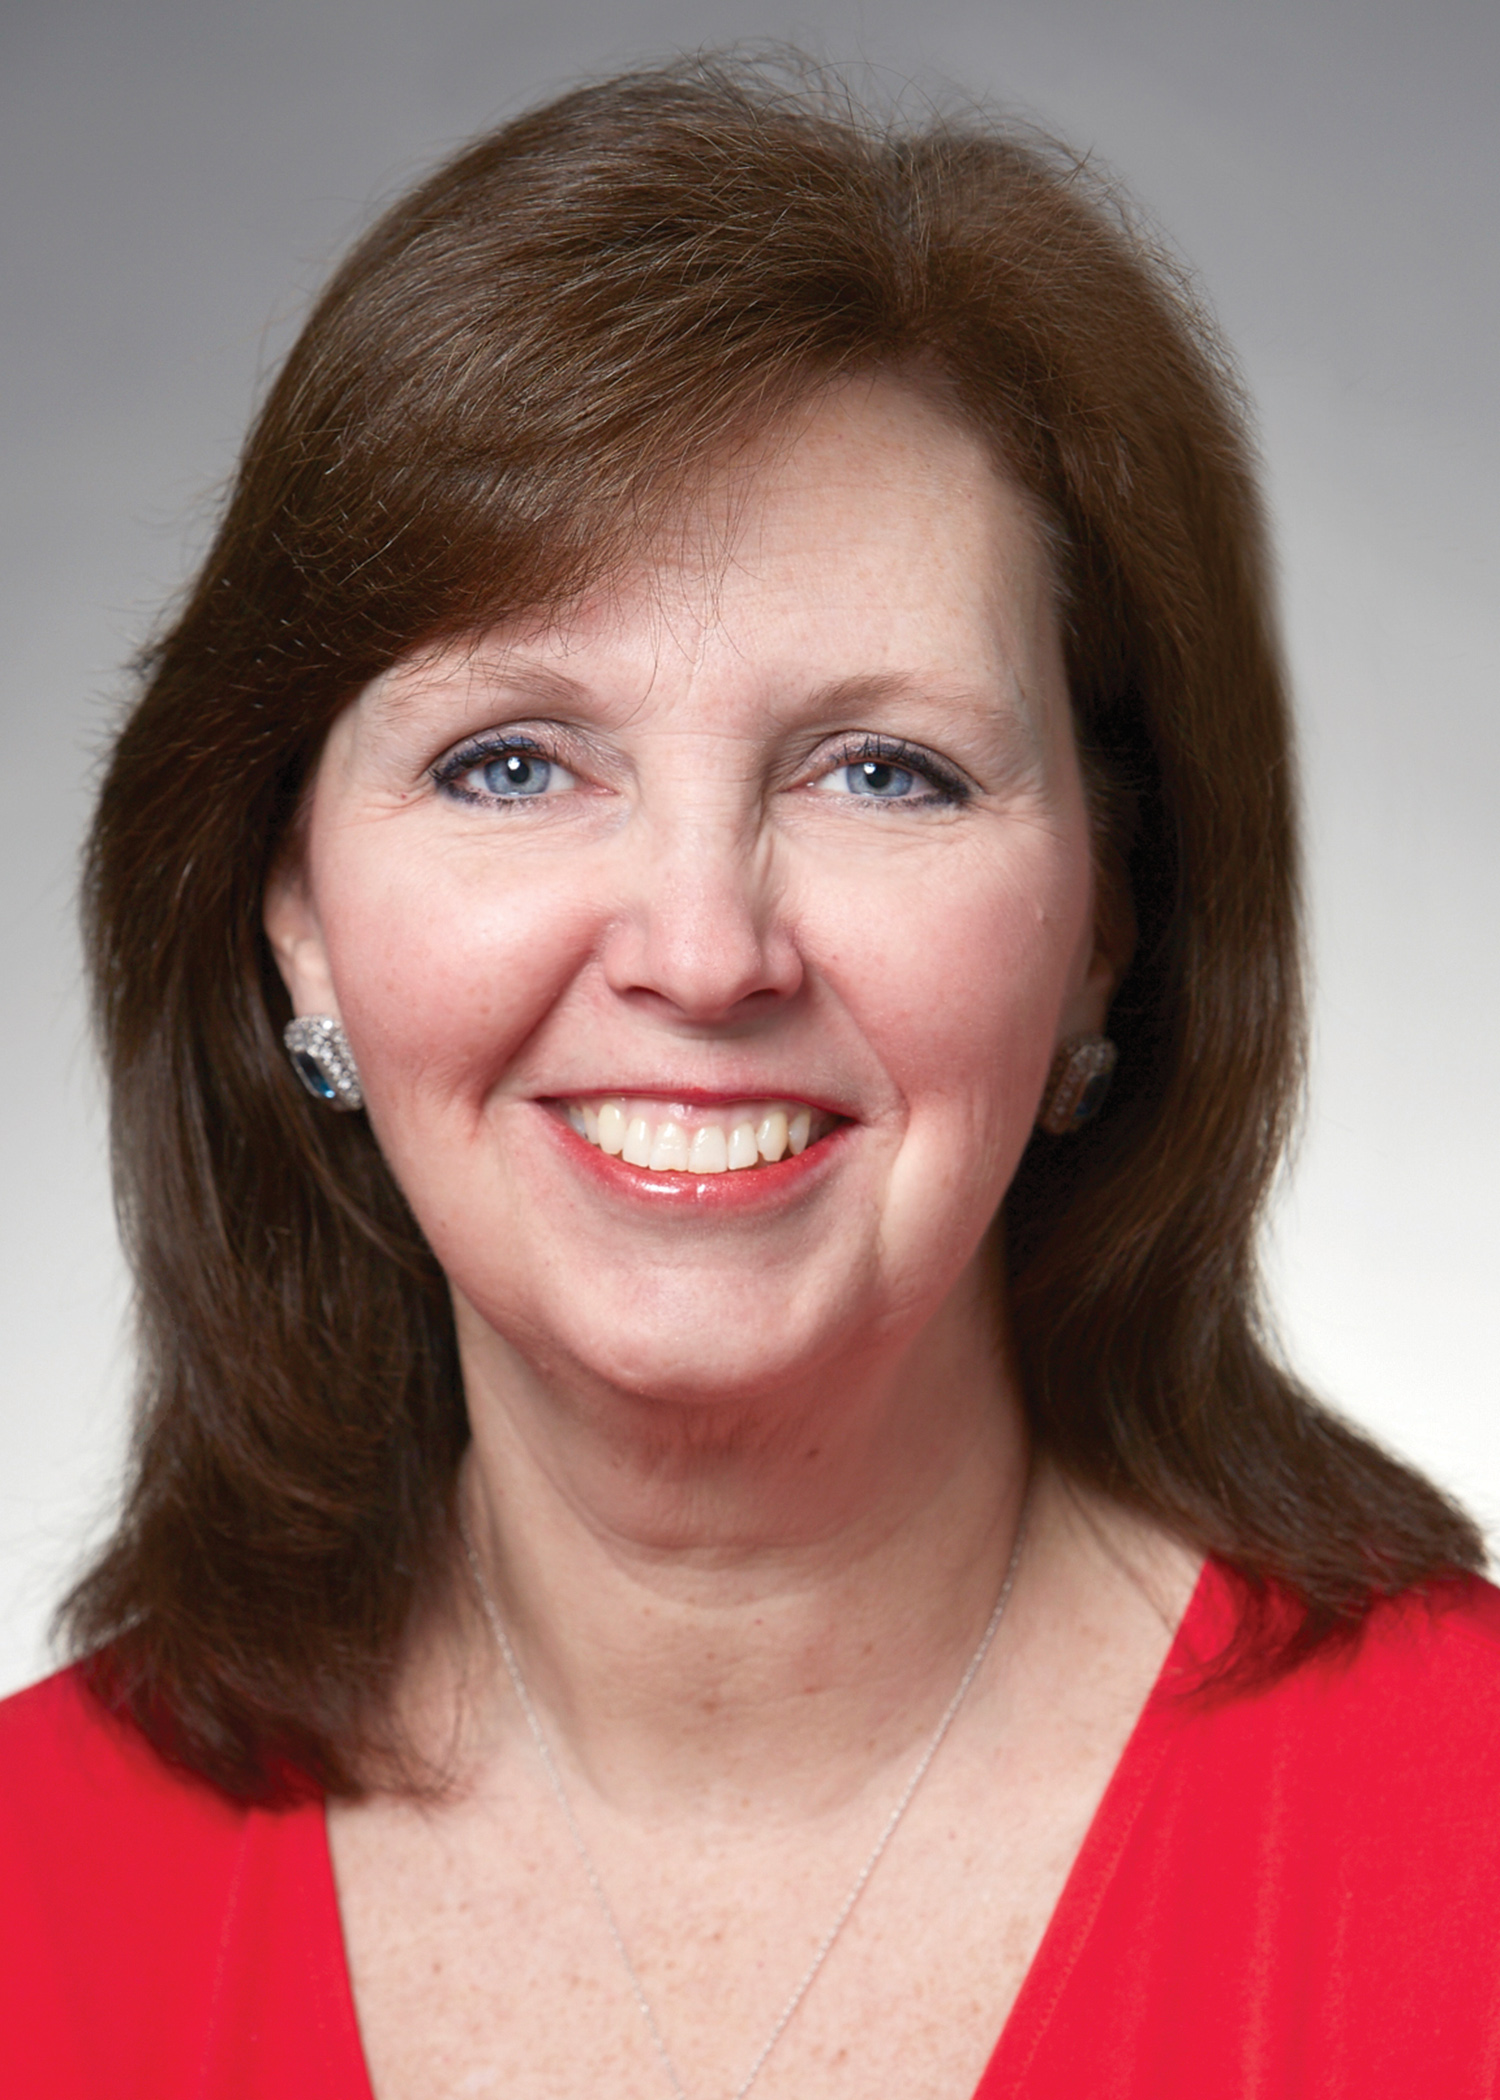 Eileen Hughes was hired as head of Product Development and Strategy in Wilmington Trust's Structured Finance division.